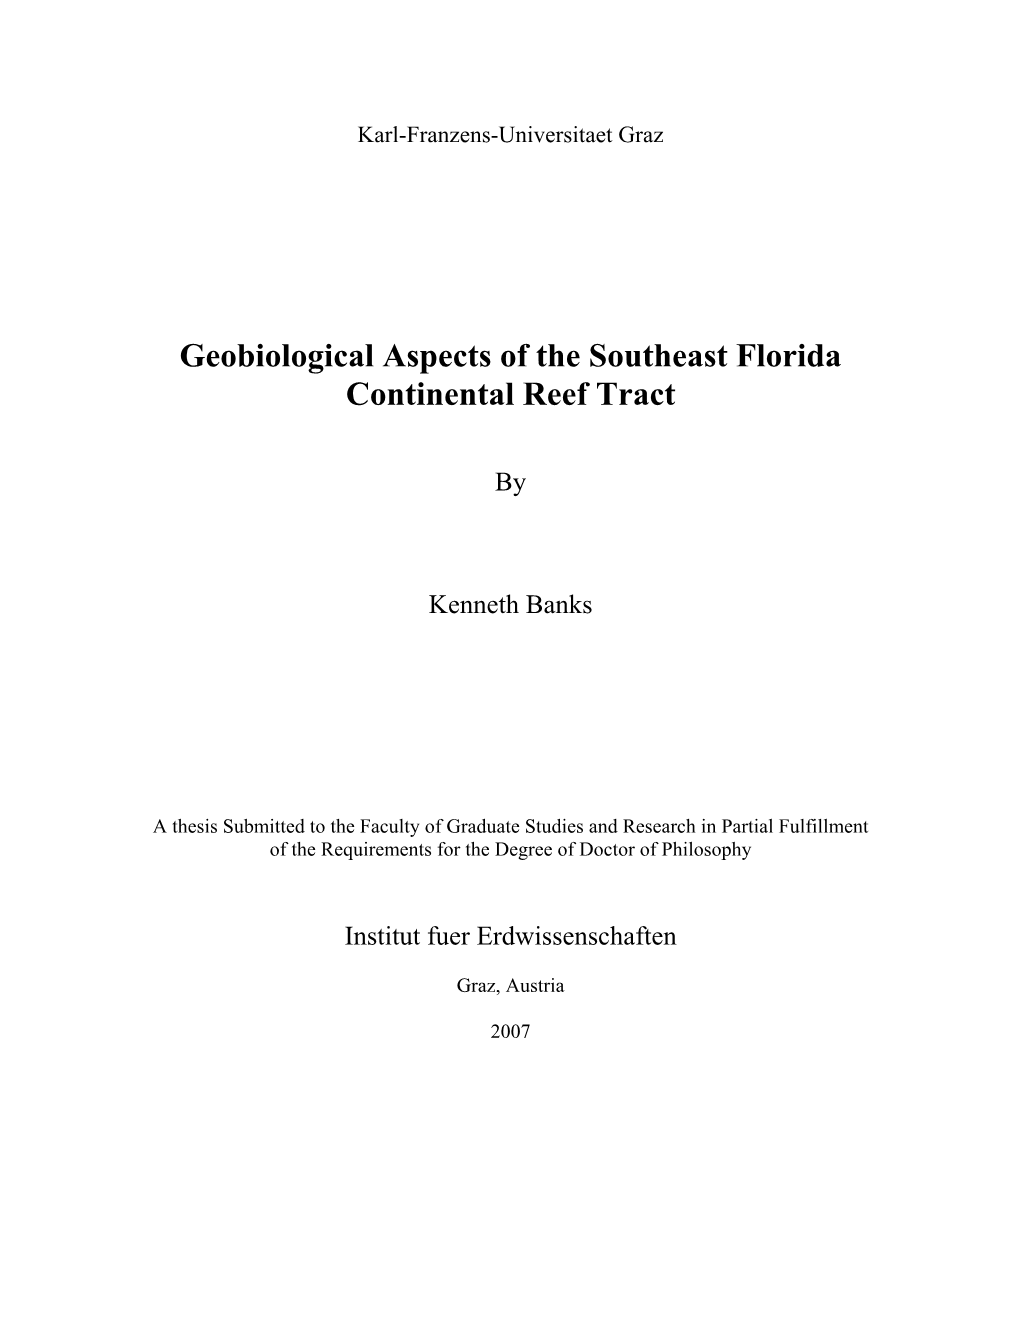 Geobiological Aspects of the Southeast Florida Continental Reef Tract